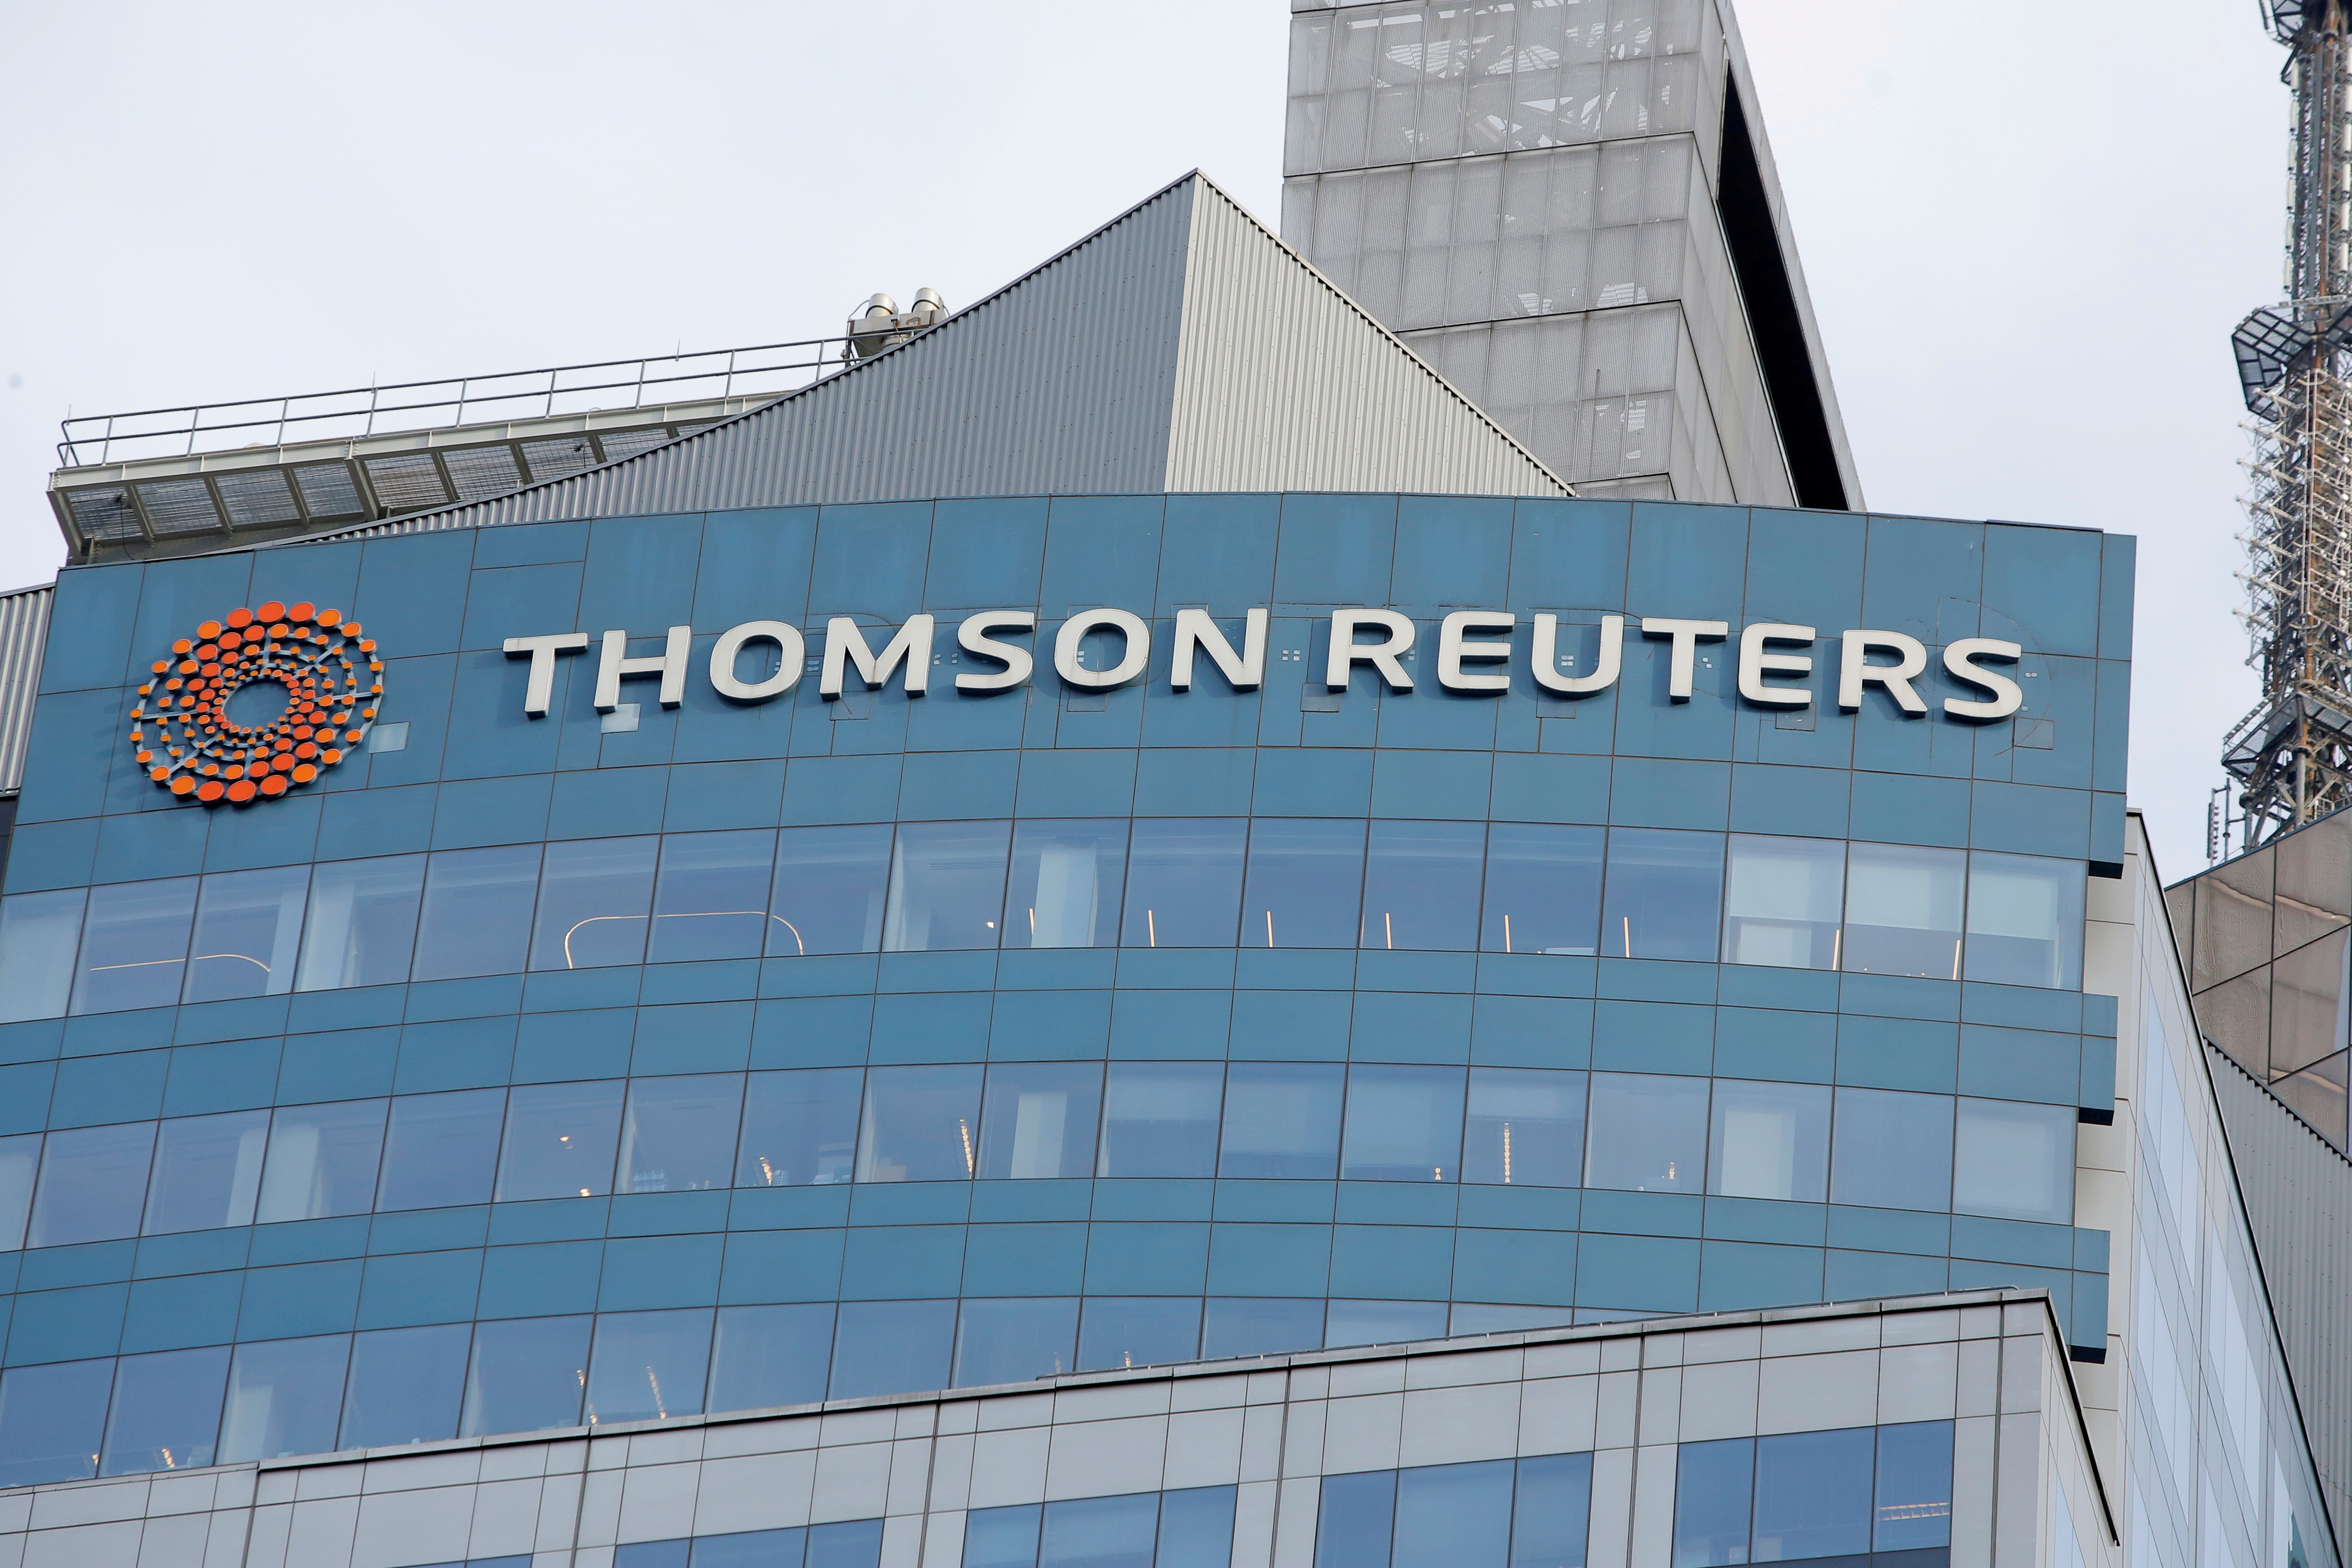 FILE PHOTO: The Thomson Reuters logo is seen on the company building in Times Square, New York.